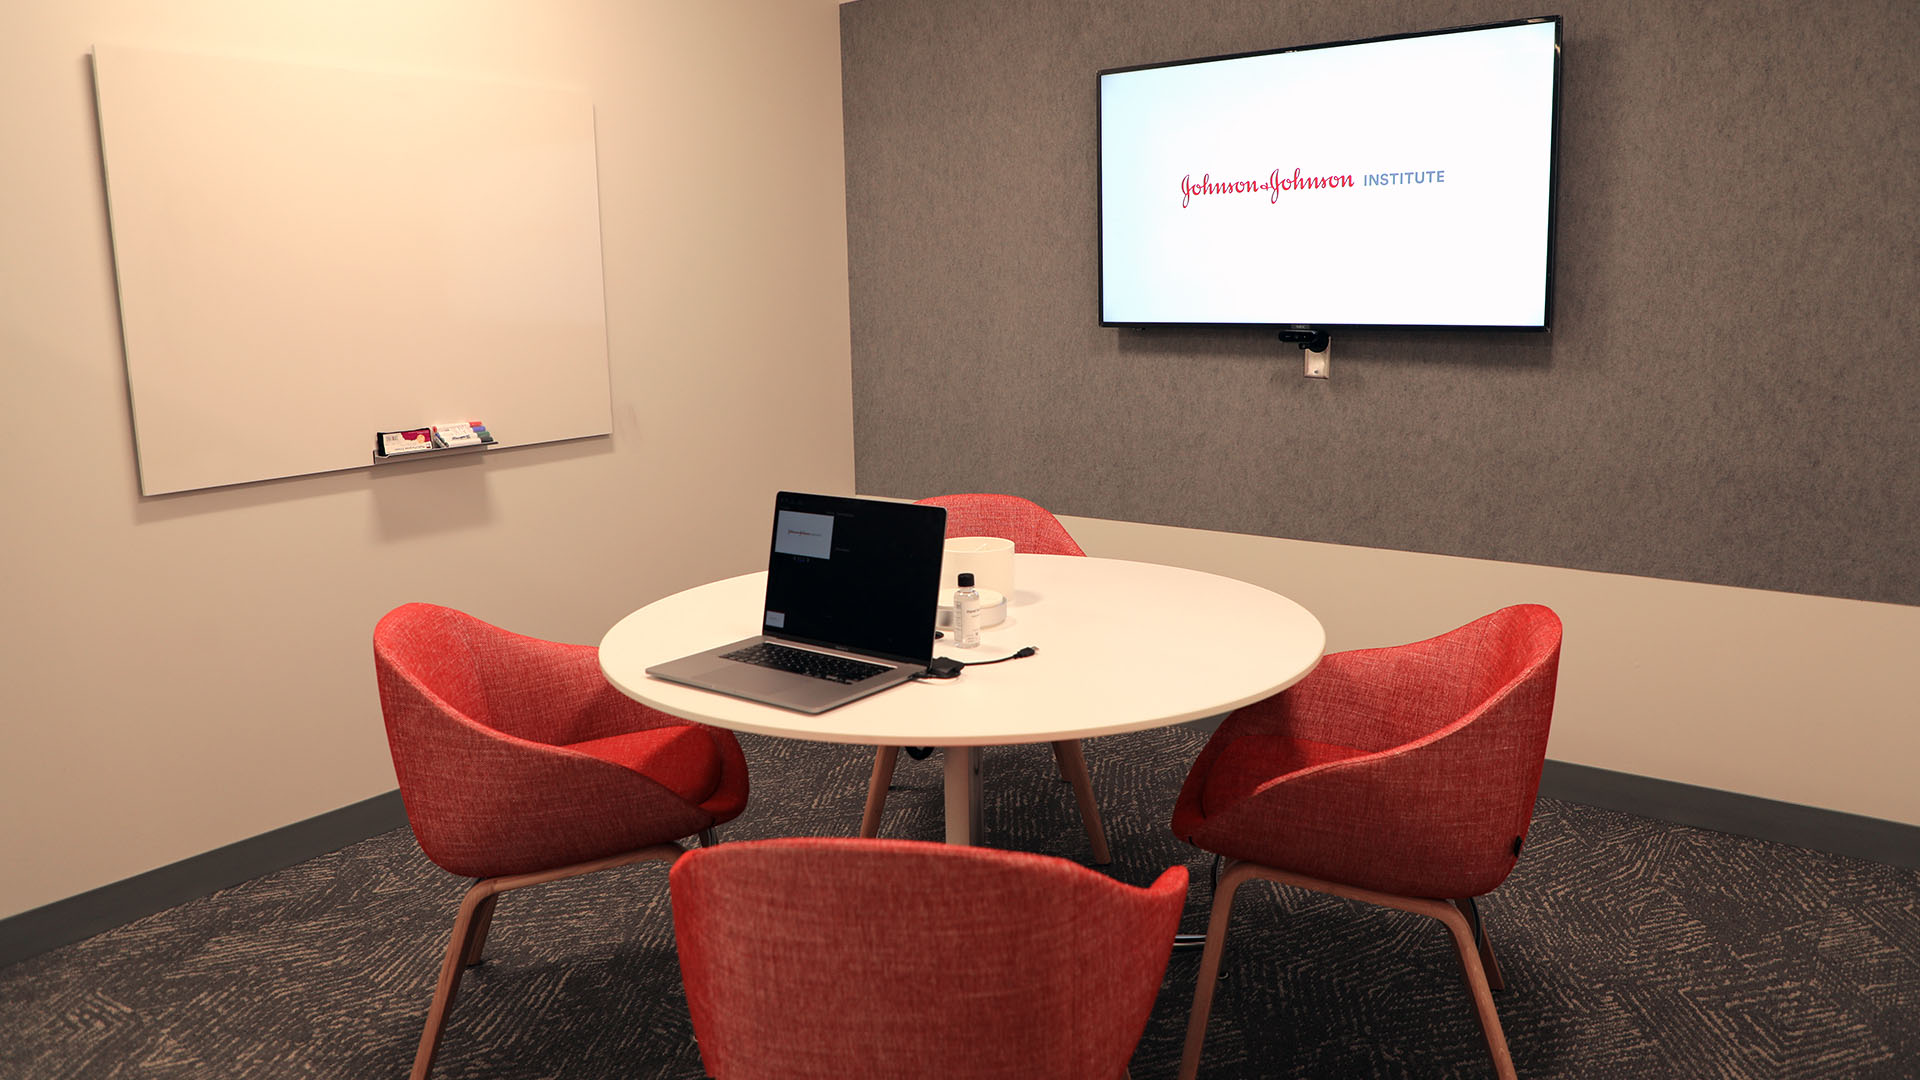 Harmony conference room located in the Johnson & Johnson Institute facility in Raritan, New Jersey. 